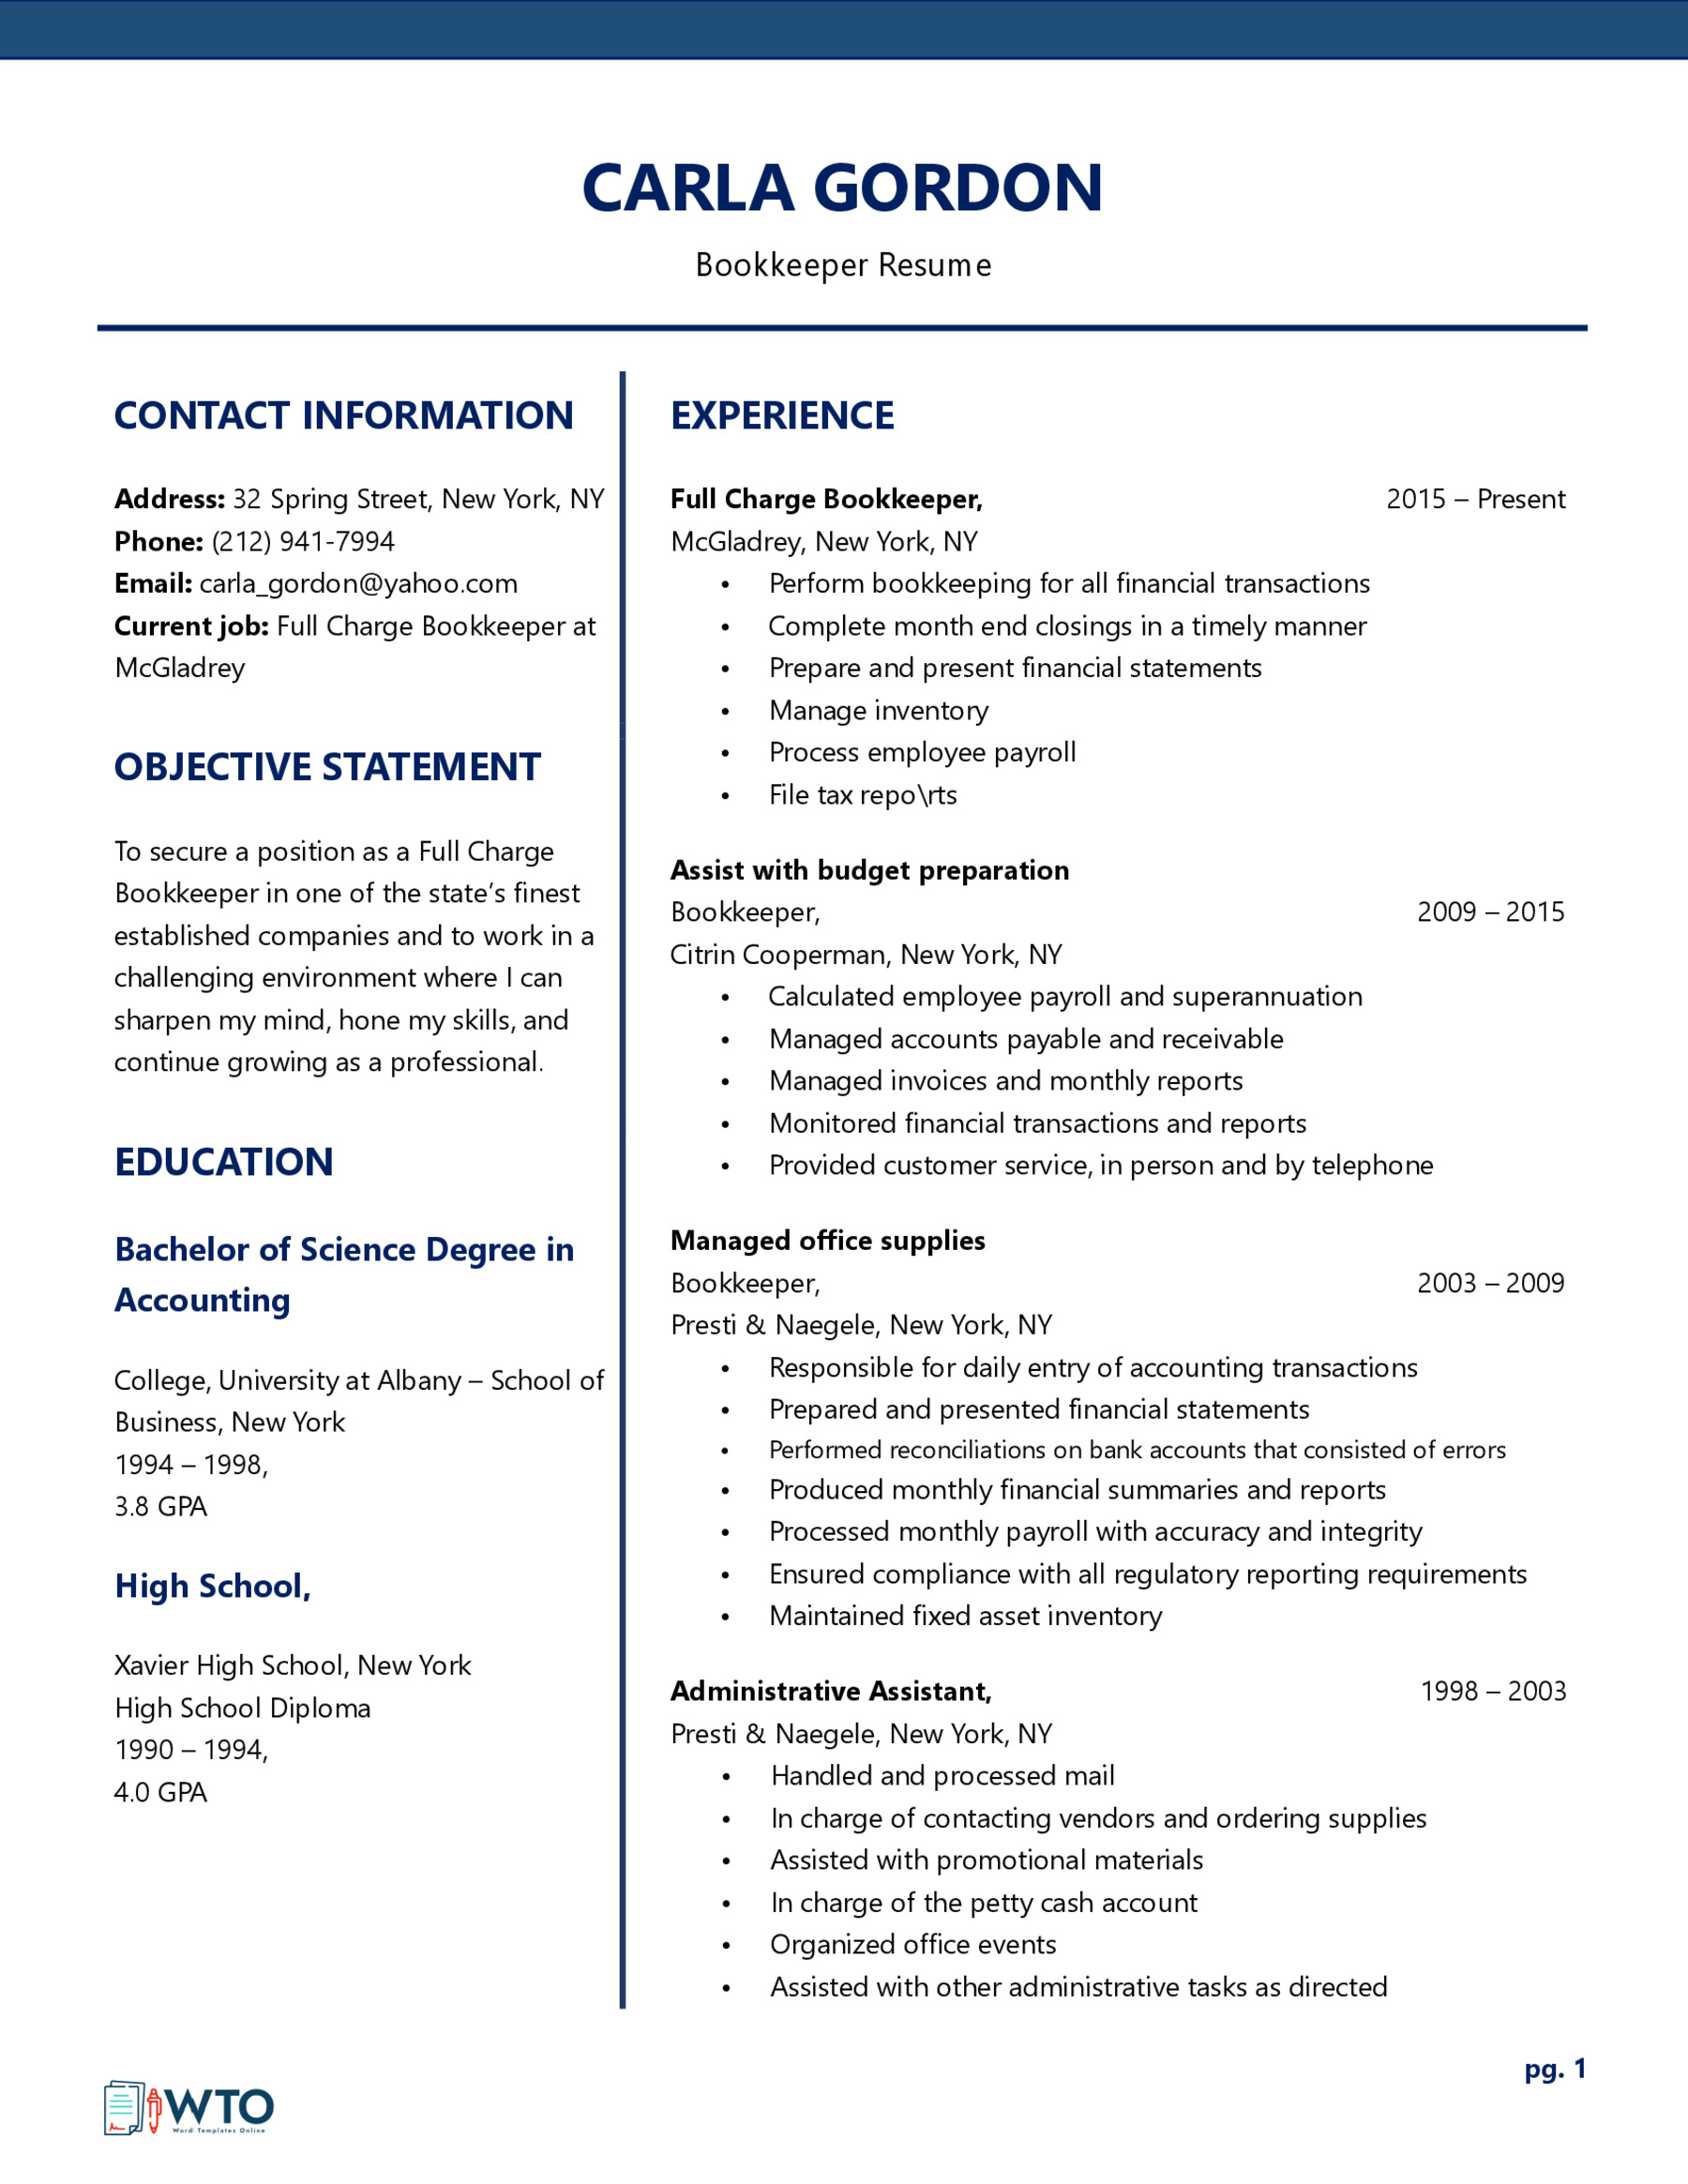 Bookkeeper Resume - Simple and Clean Format